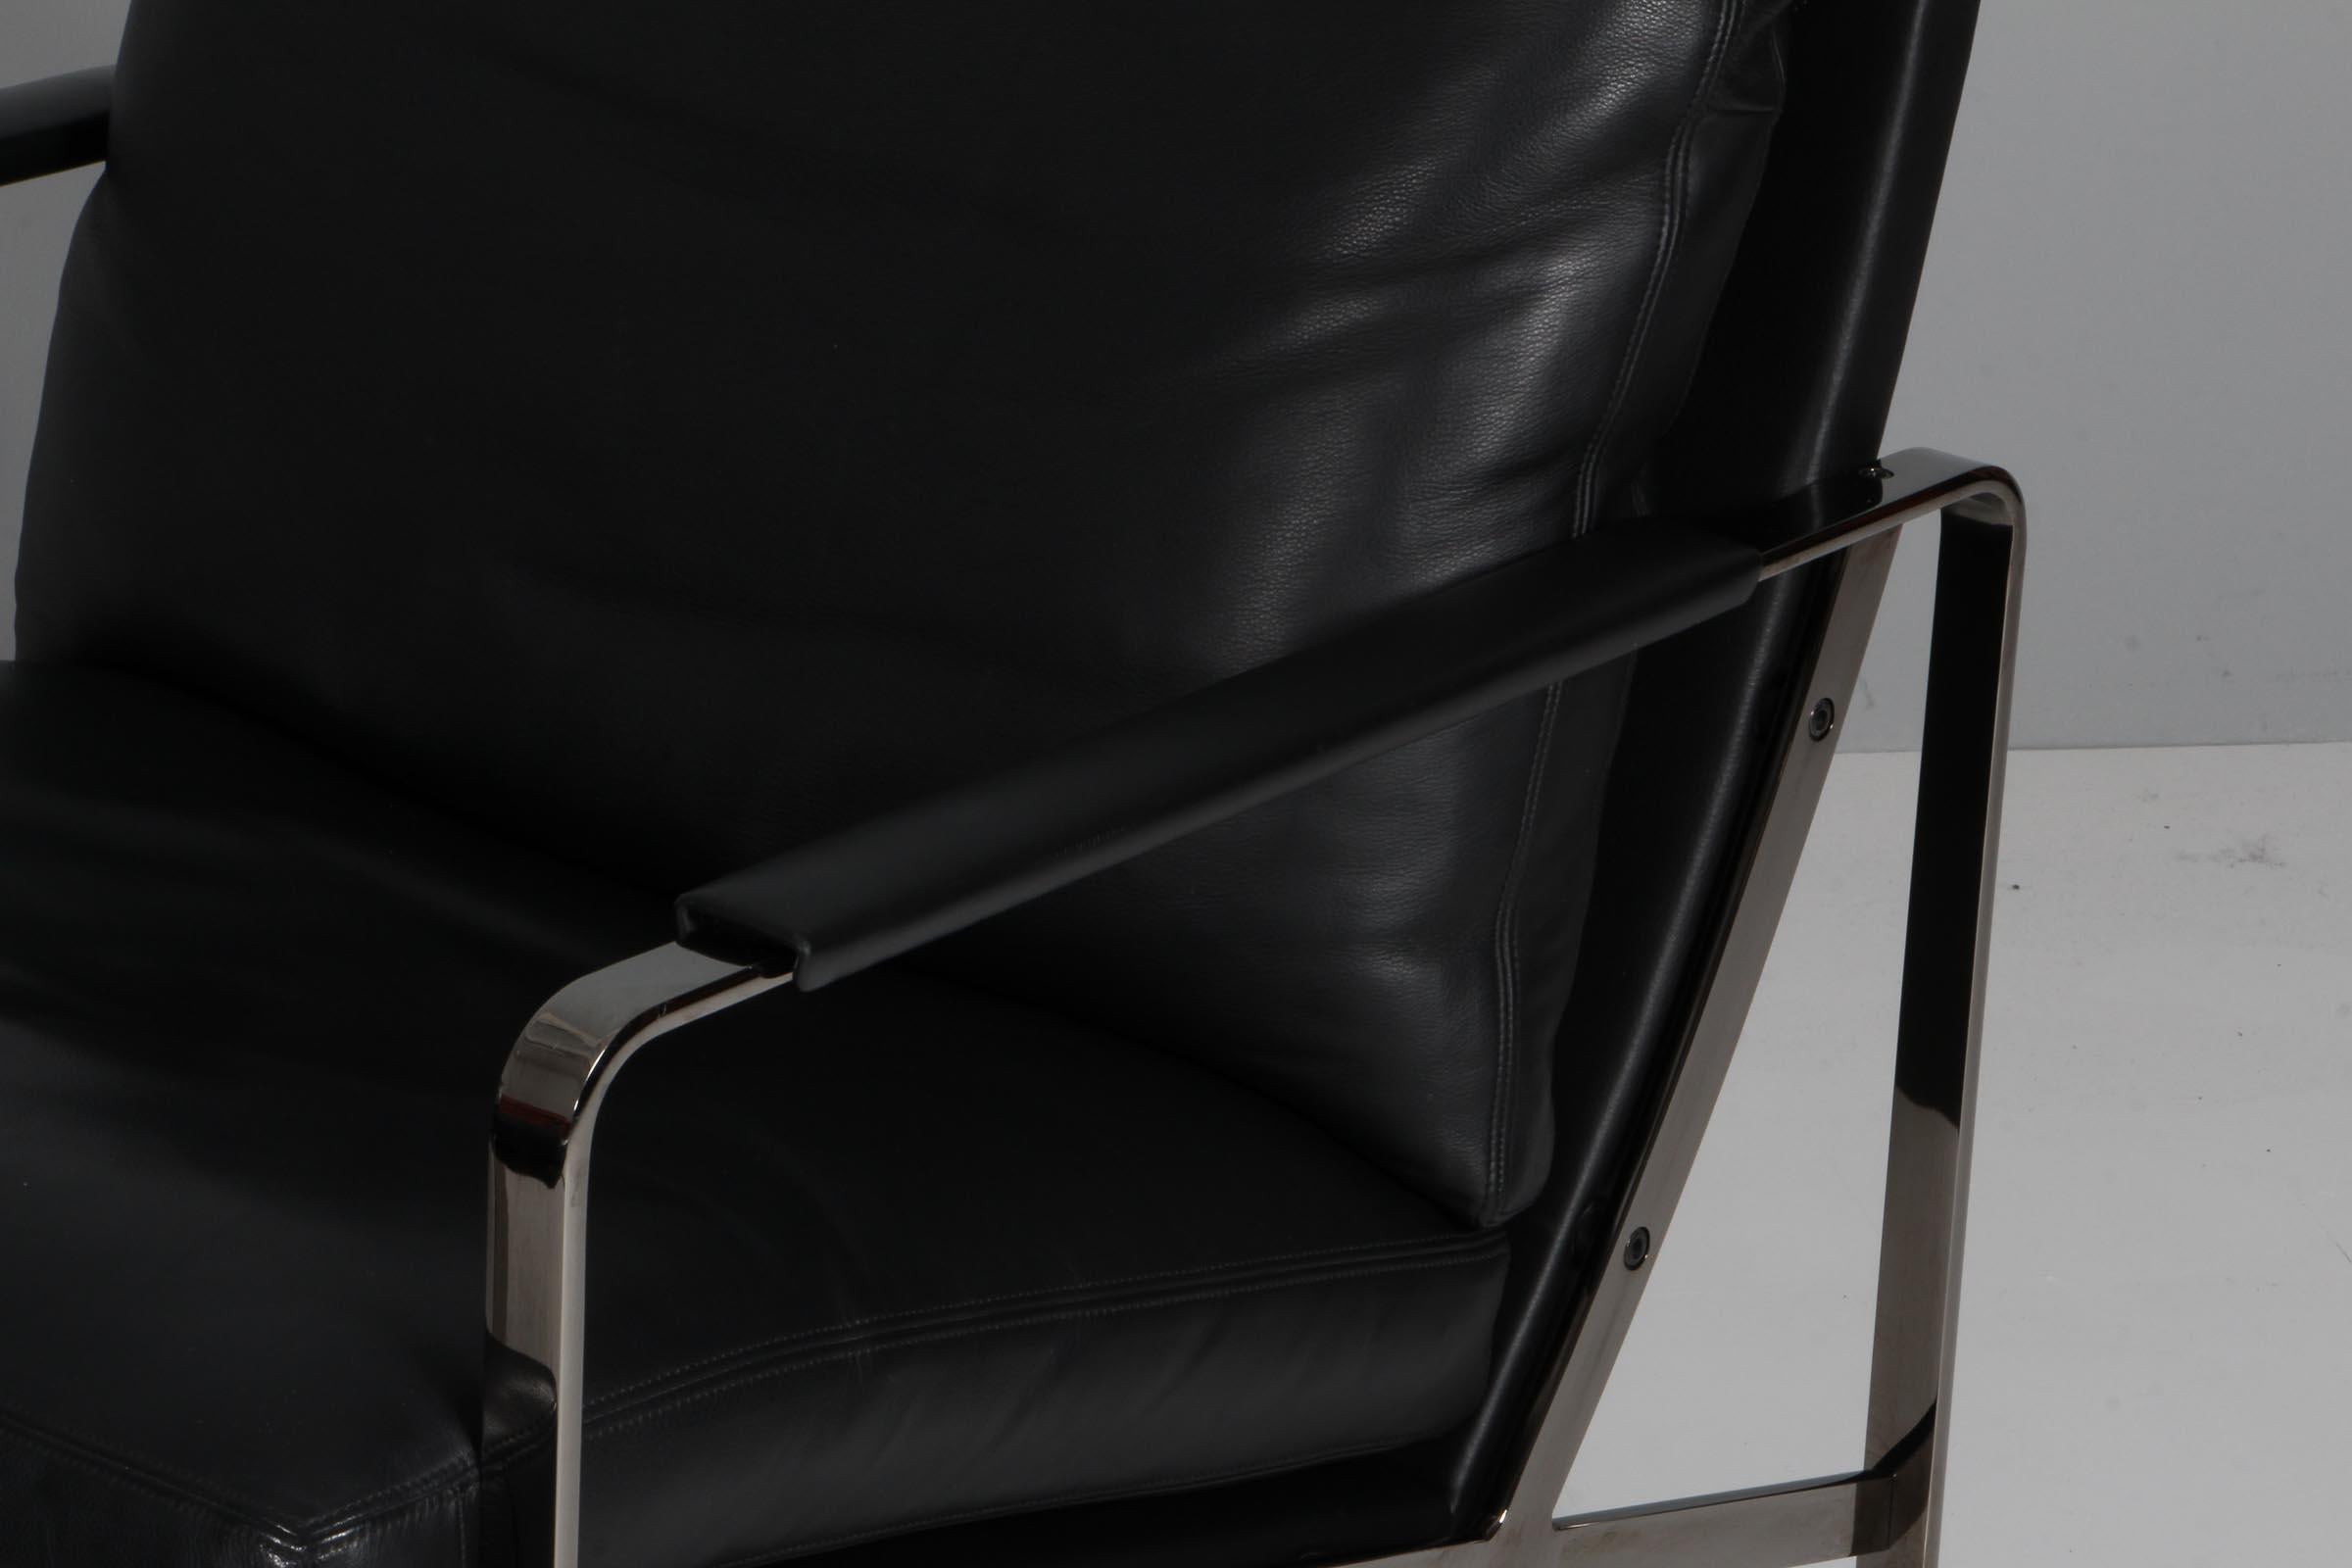 Preben Fabricius lounge chair in black aniline leather, original leather upholstery.

Frame of dark chromed steel.

Model 710, made by Walter Knoll.